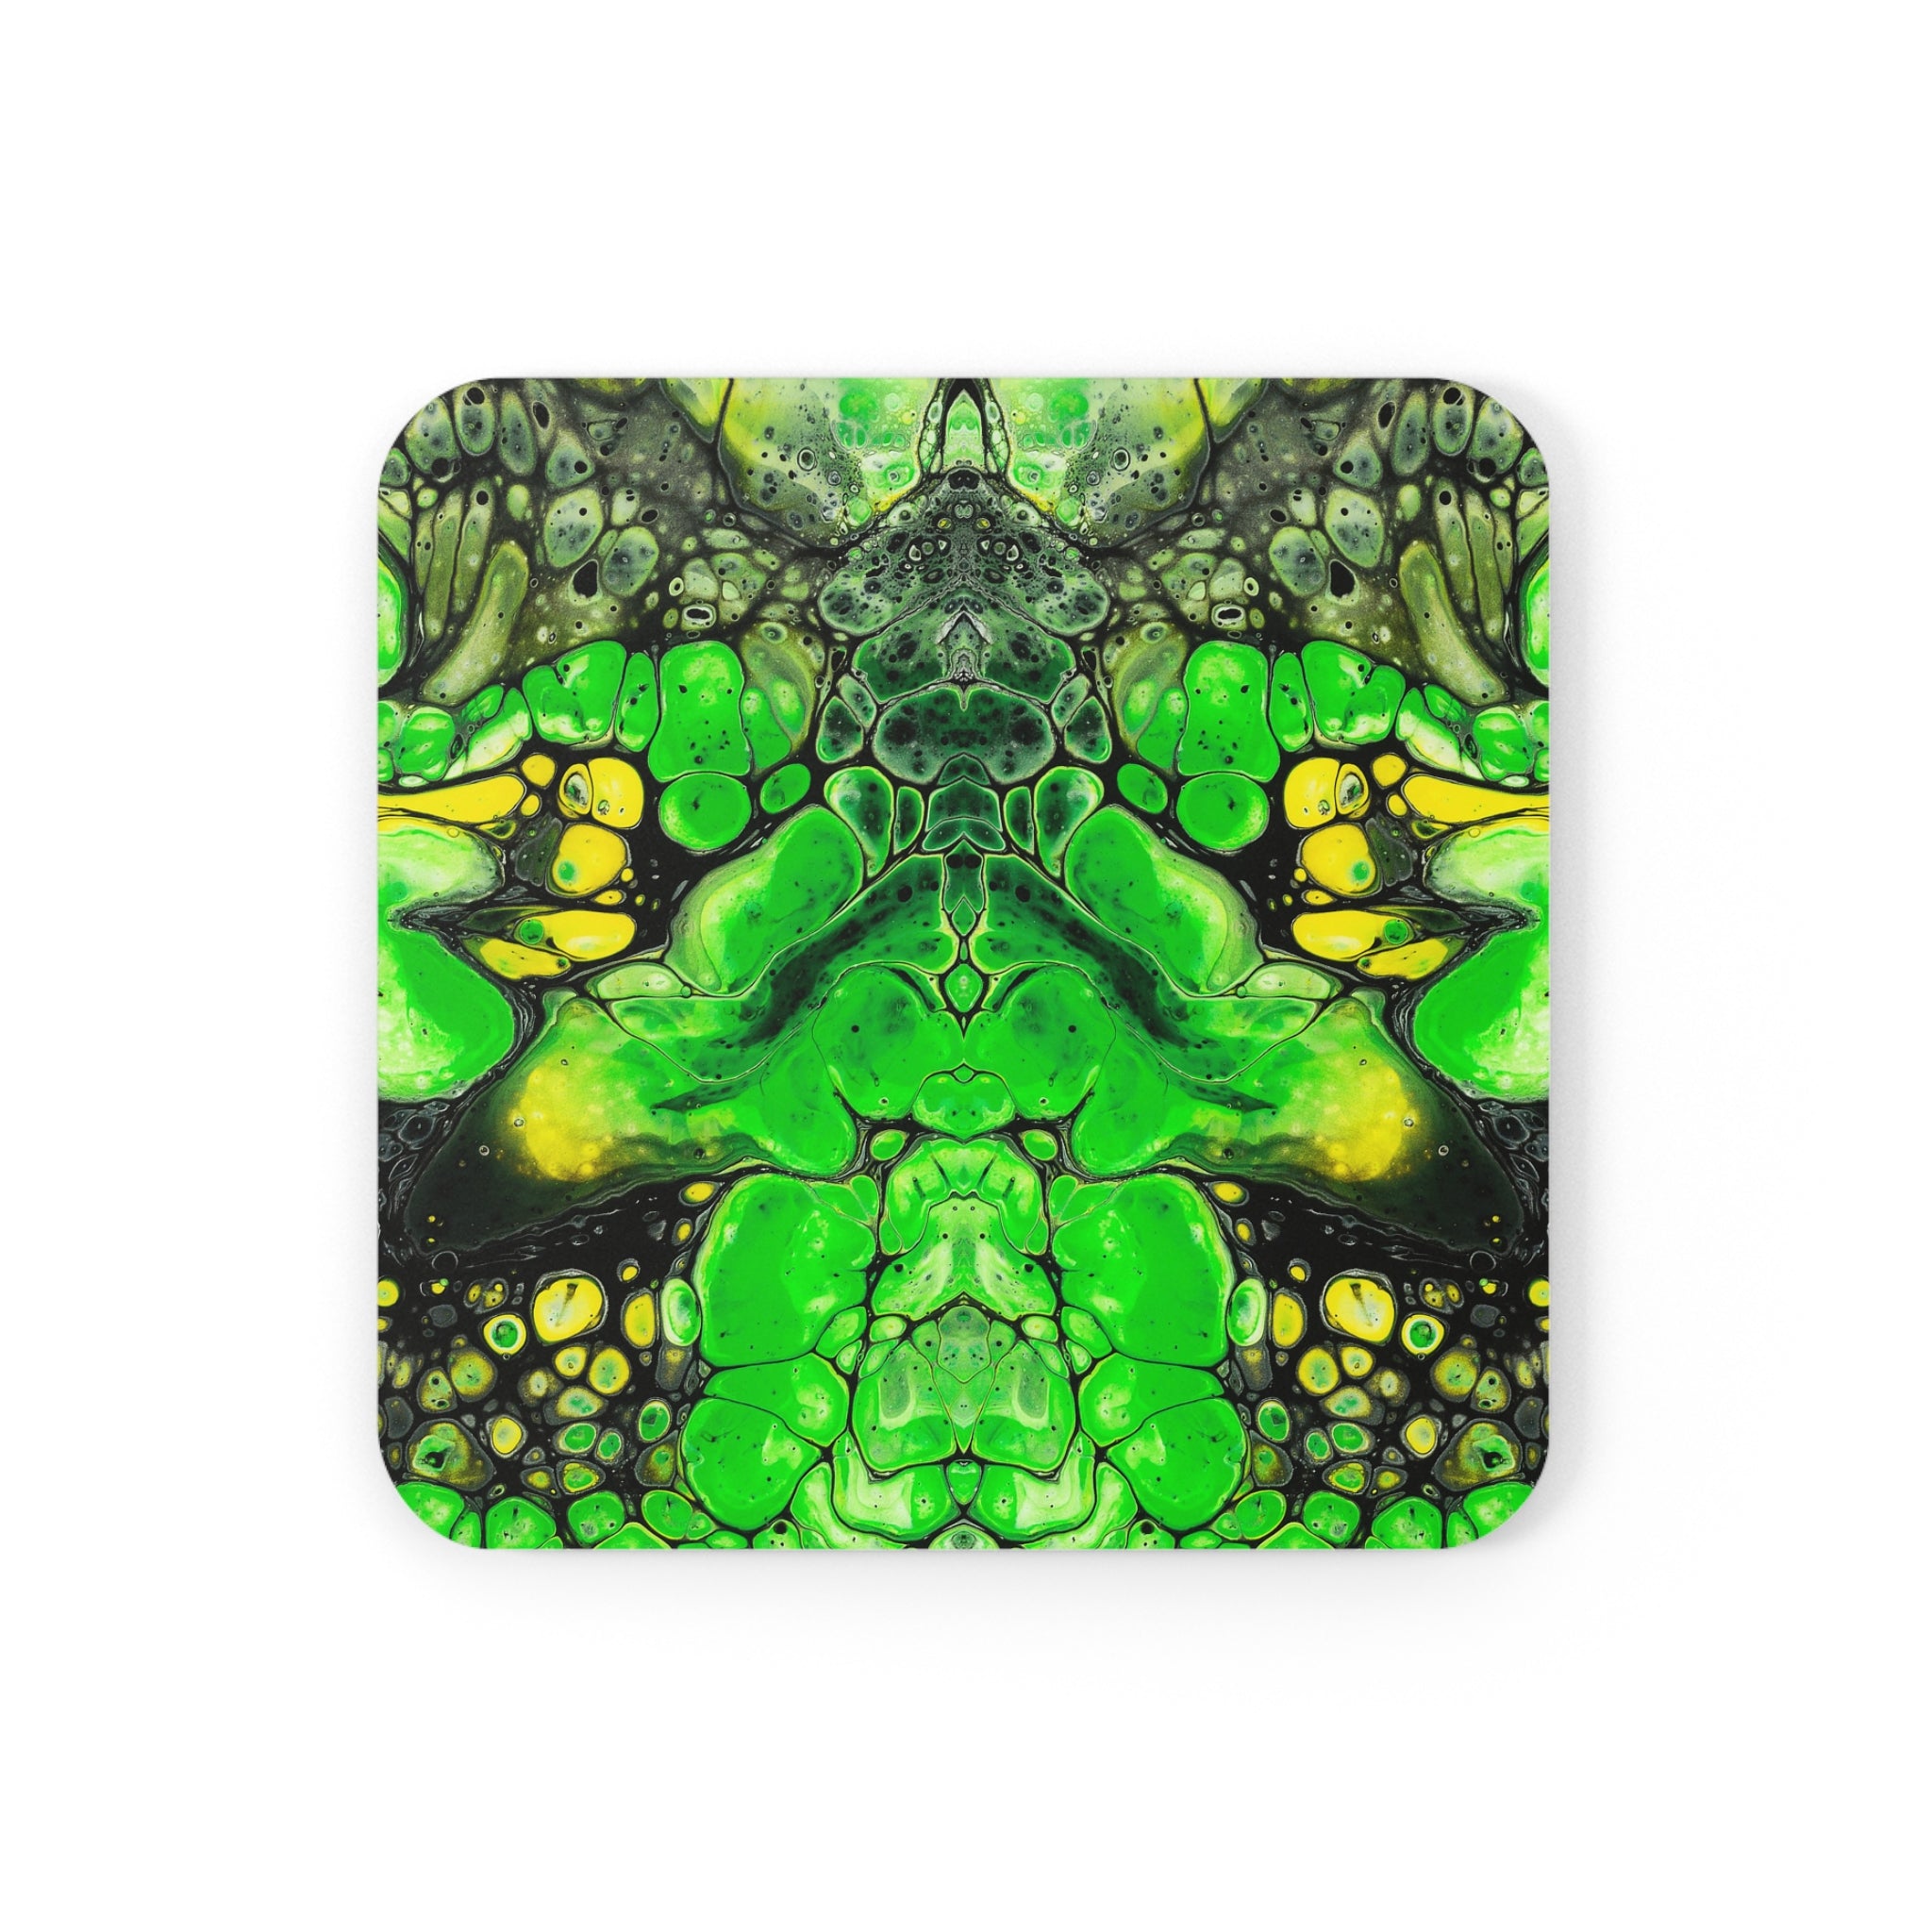 Cameron Creations - Green Galaxy - Stylish Coffee Coaster - Square Front